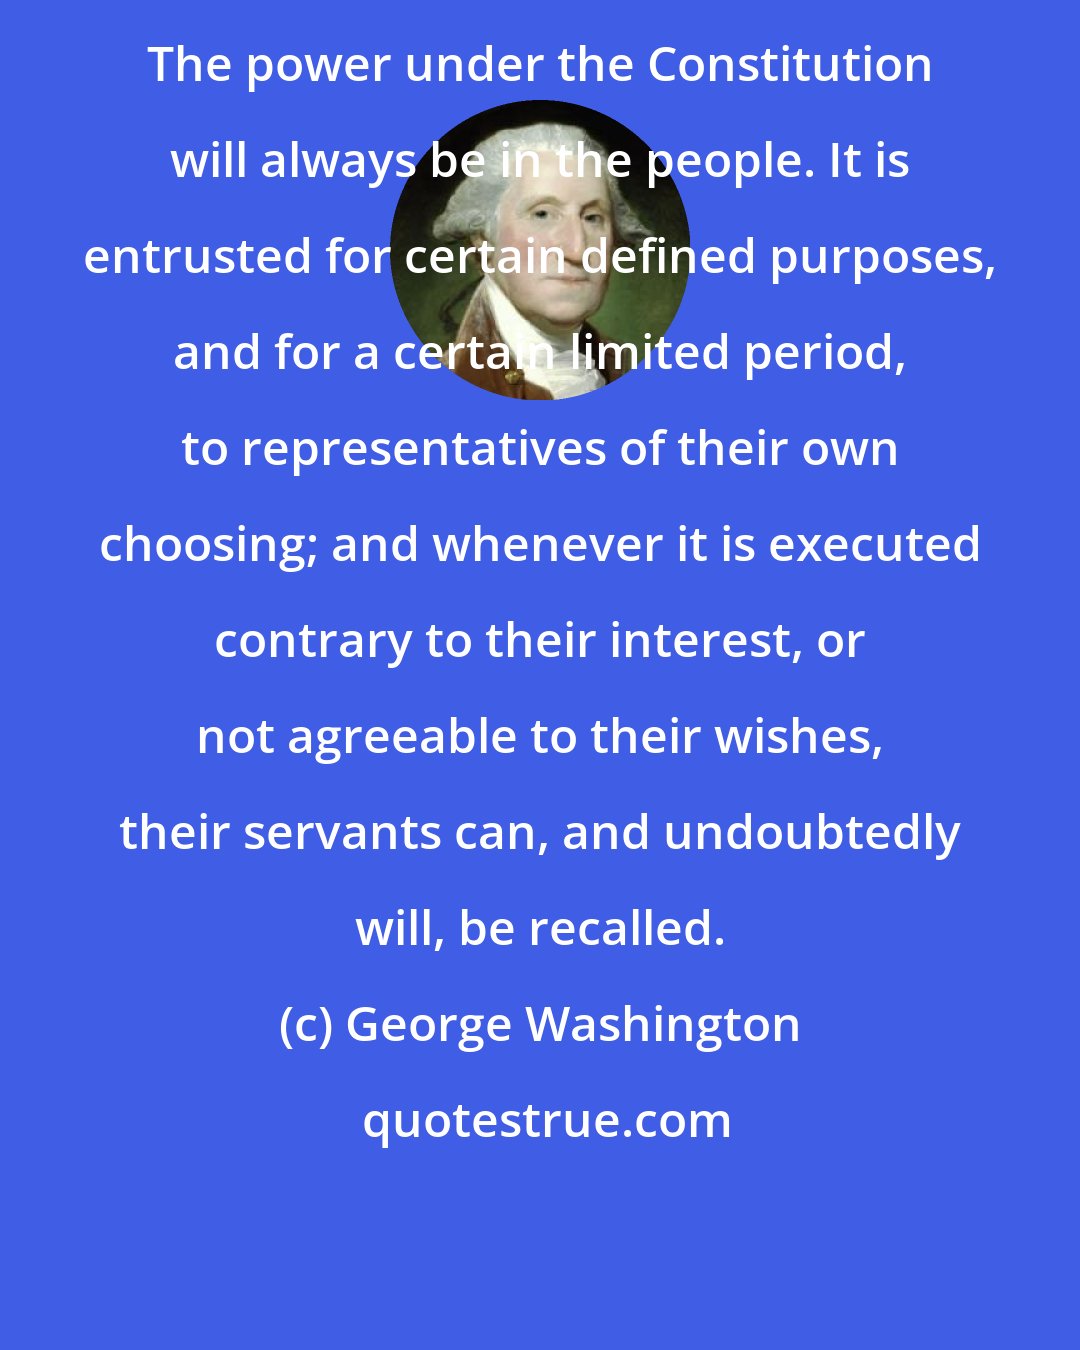 George Washington: The power under the Constitution will always be in the people. It is entrusted for certain defined purposes, and for a certain limited period, to representatives of their own choosing; and whenever it is executed contrary to their interest, or not agreeable to their wishes, their servants can, and undoubtedly will, be recalled.